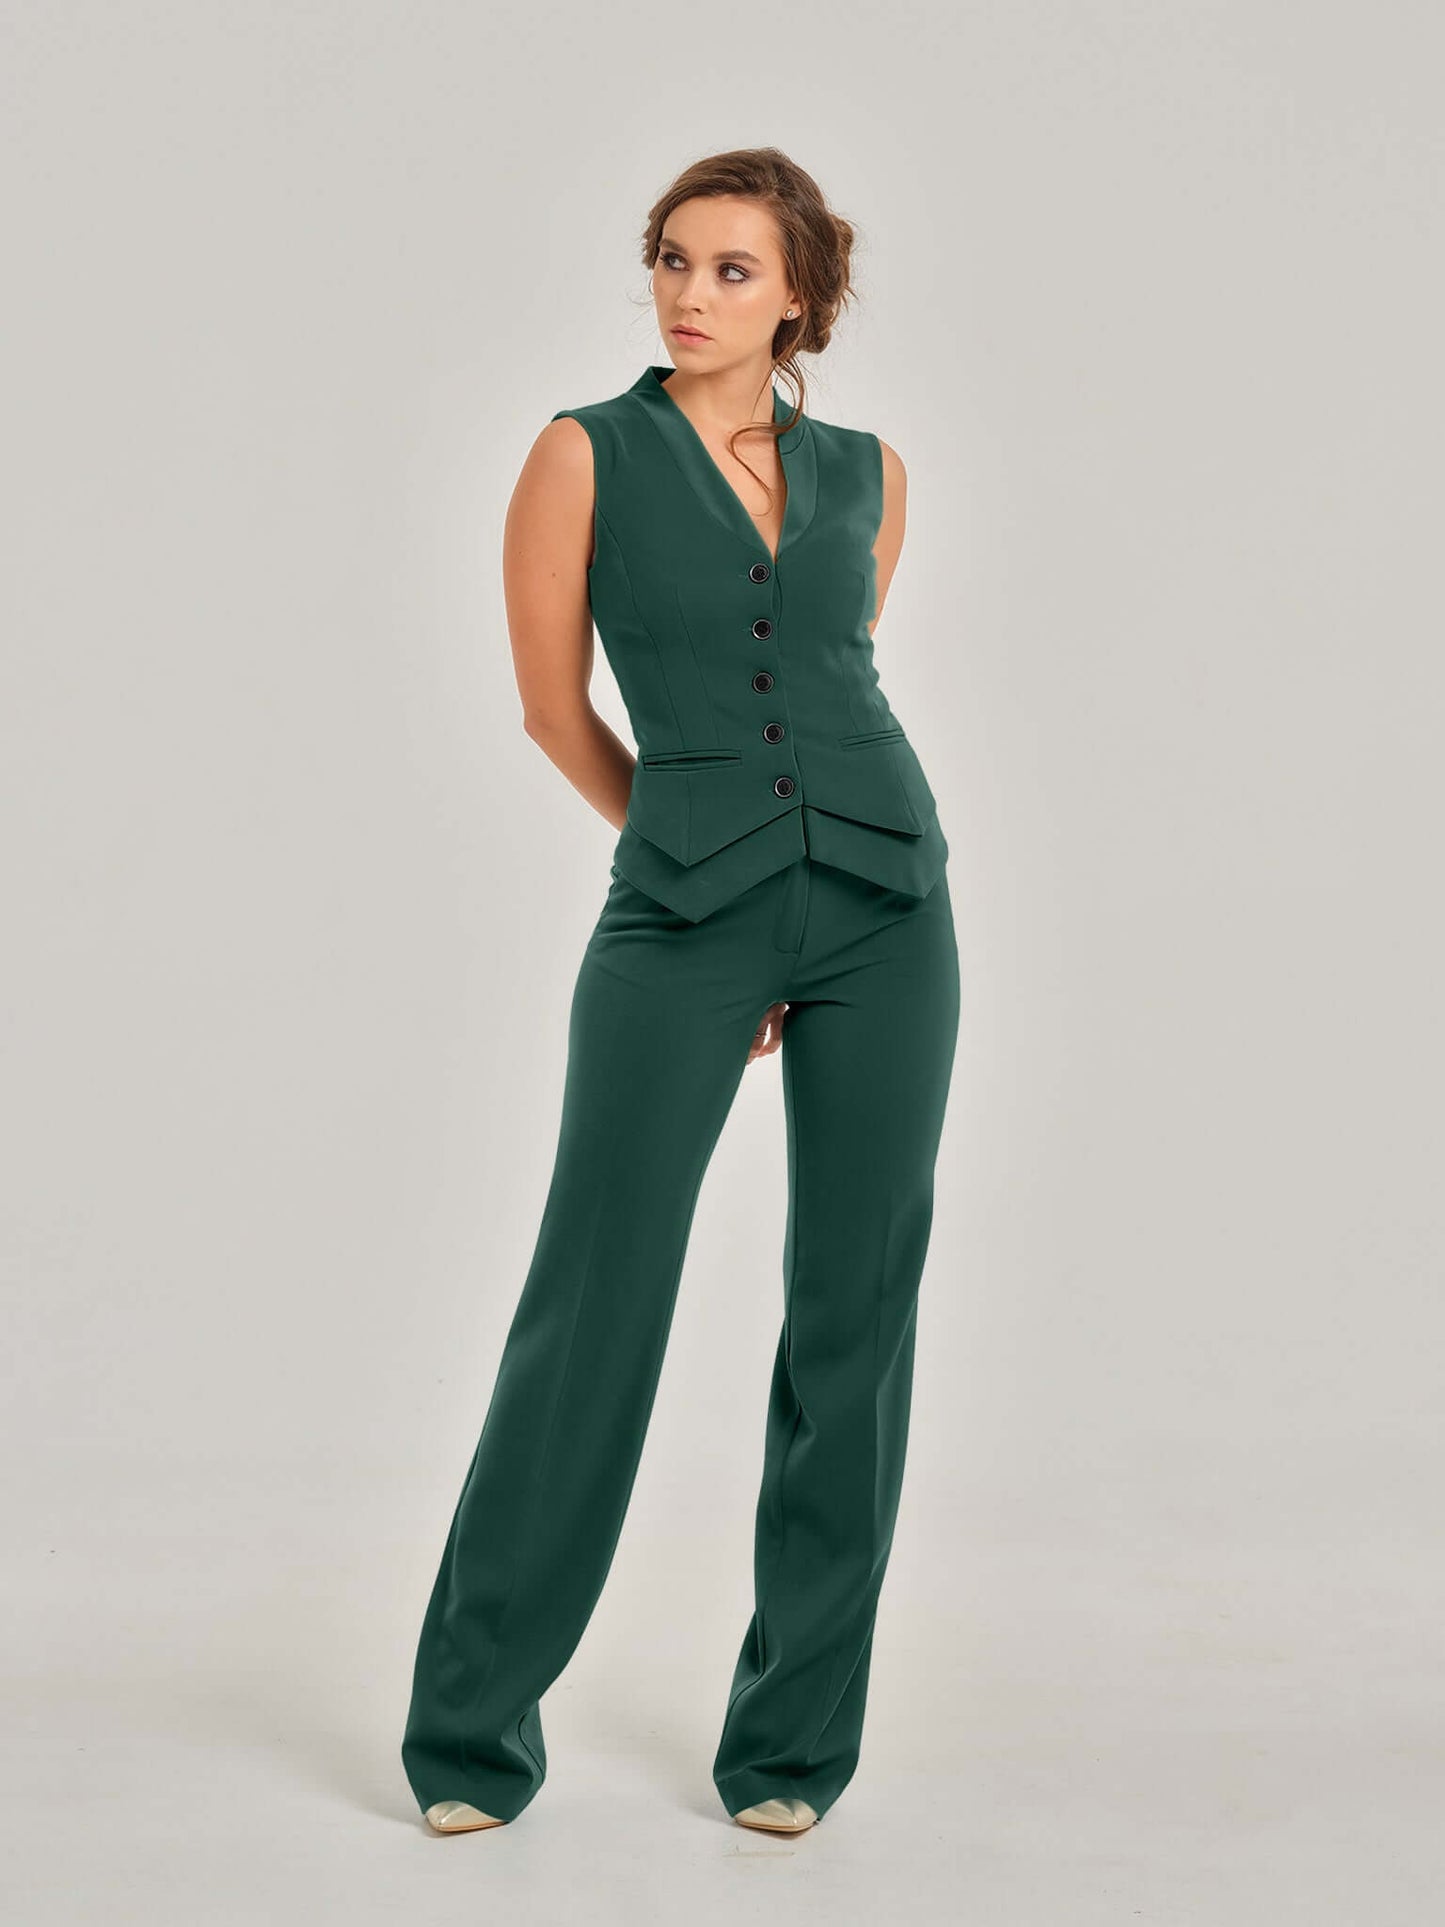 Emerald Dream Fitted Single-Breasted Waistcoat